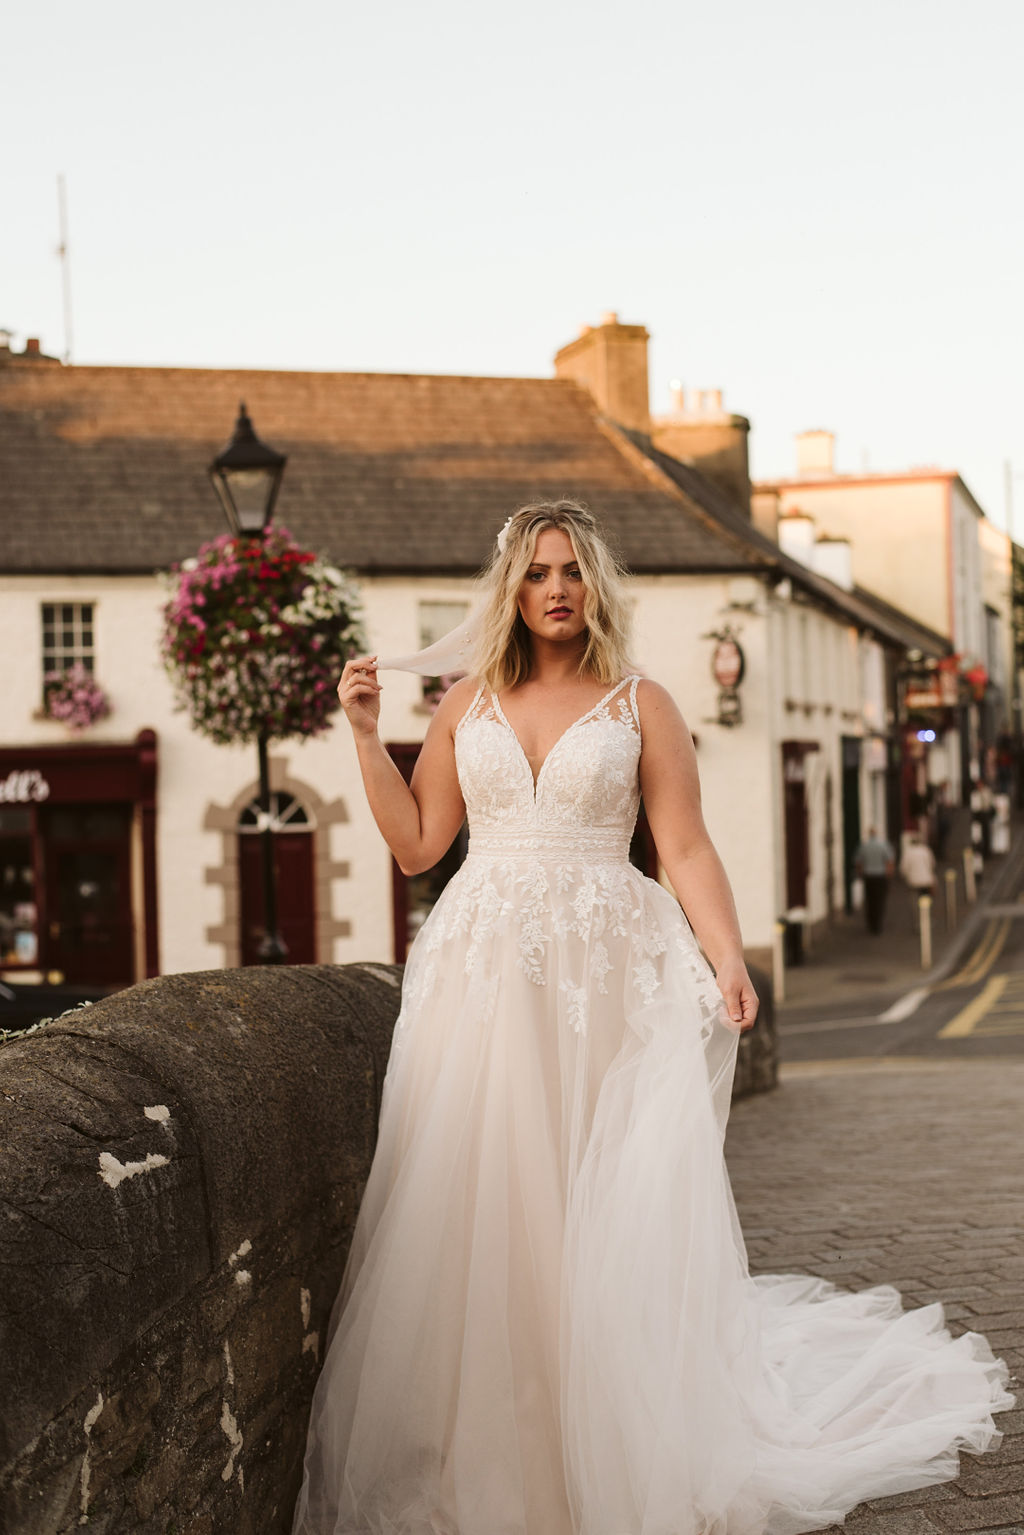 Bride walks along bride in Westport Ireland wearing a lace and tulle wedding dress with lace straps